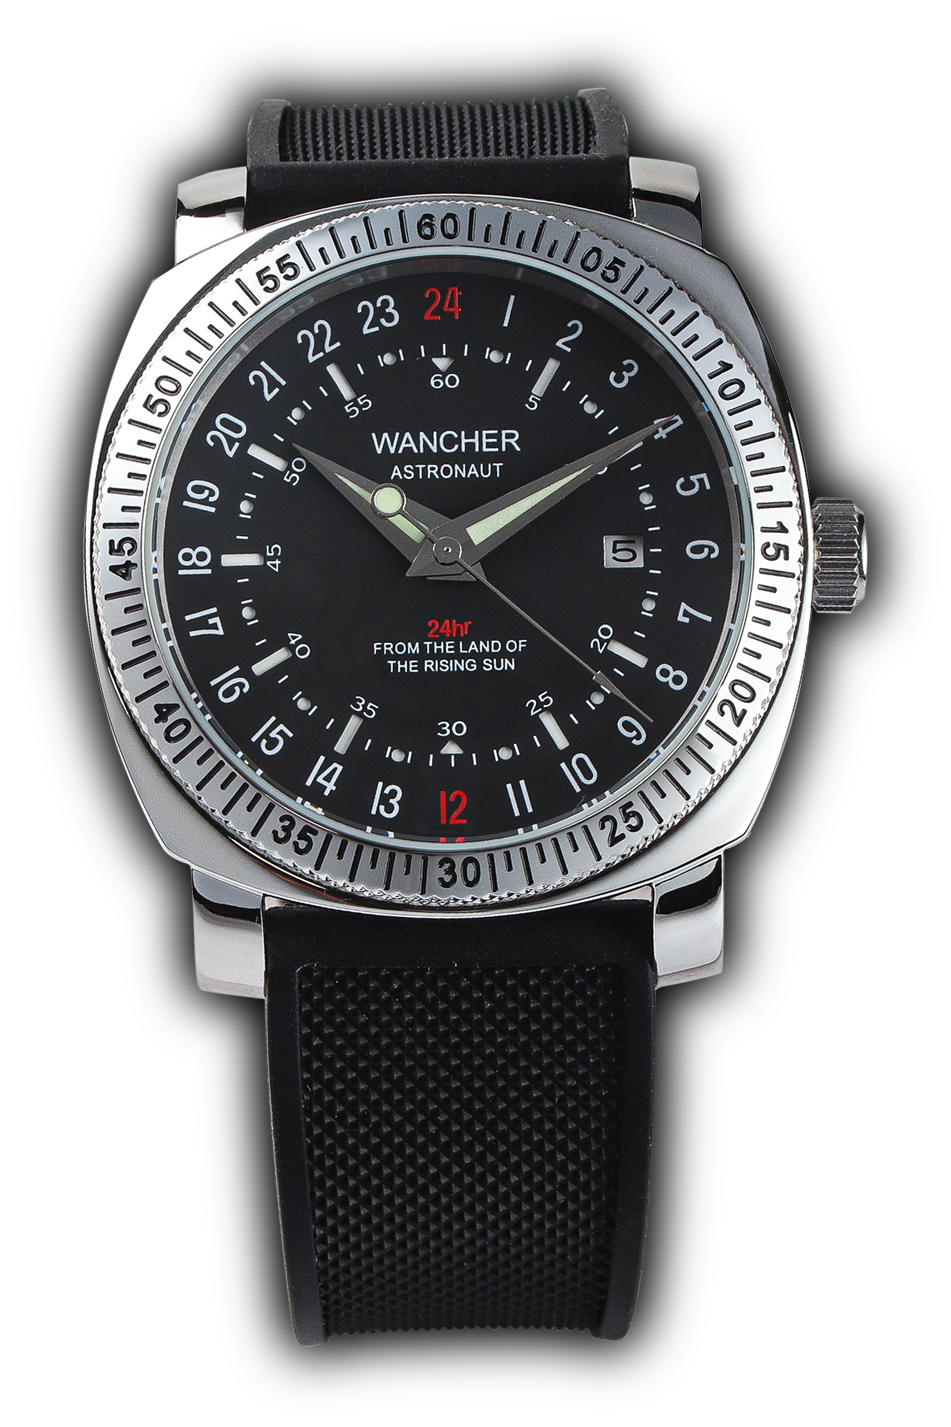 Astronaut - Wancher Watch Wancher Watch Black Wancher Watch Astronaut {{ Automatic Watch {{ Watch }} }} {{ Japan }}Wancher Watch Astronaut with 24-hour Ivory or Green dial, Seagull ST1612 Mechanical movement, and urethane belt - the perfect blend of style and function.